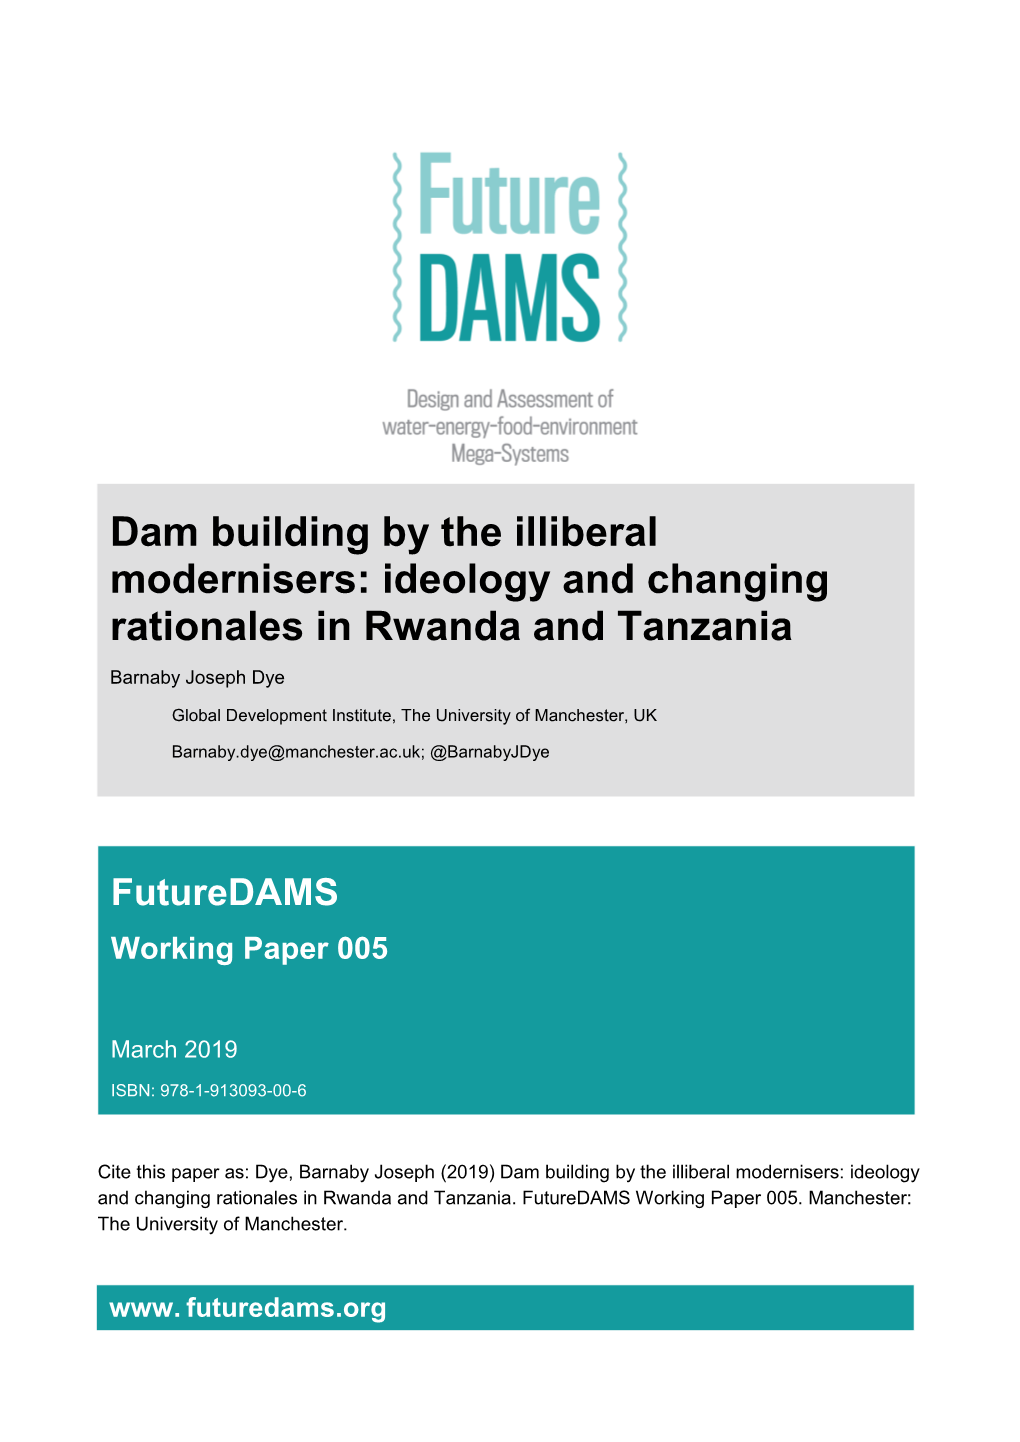 Dam Building by the Illiberal Modernisers: Ideology and Changing Rationales in Rwanda and Tanzania